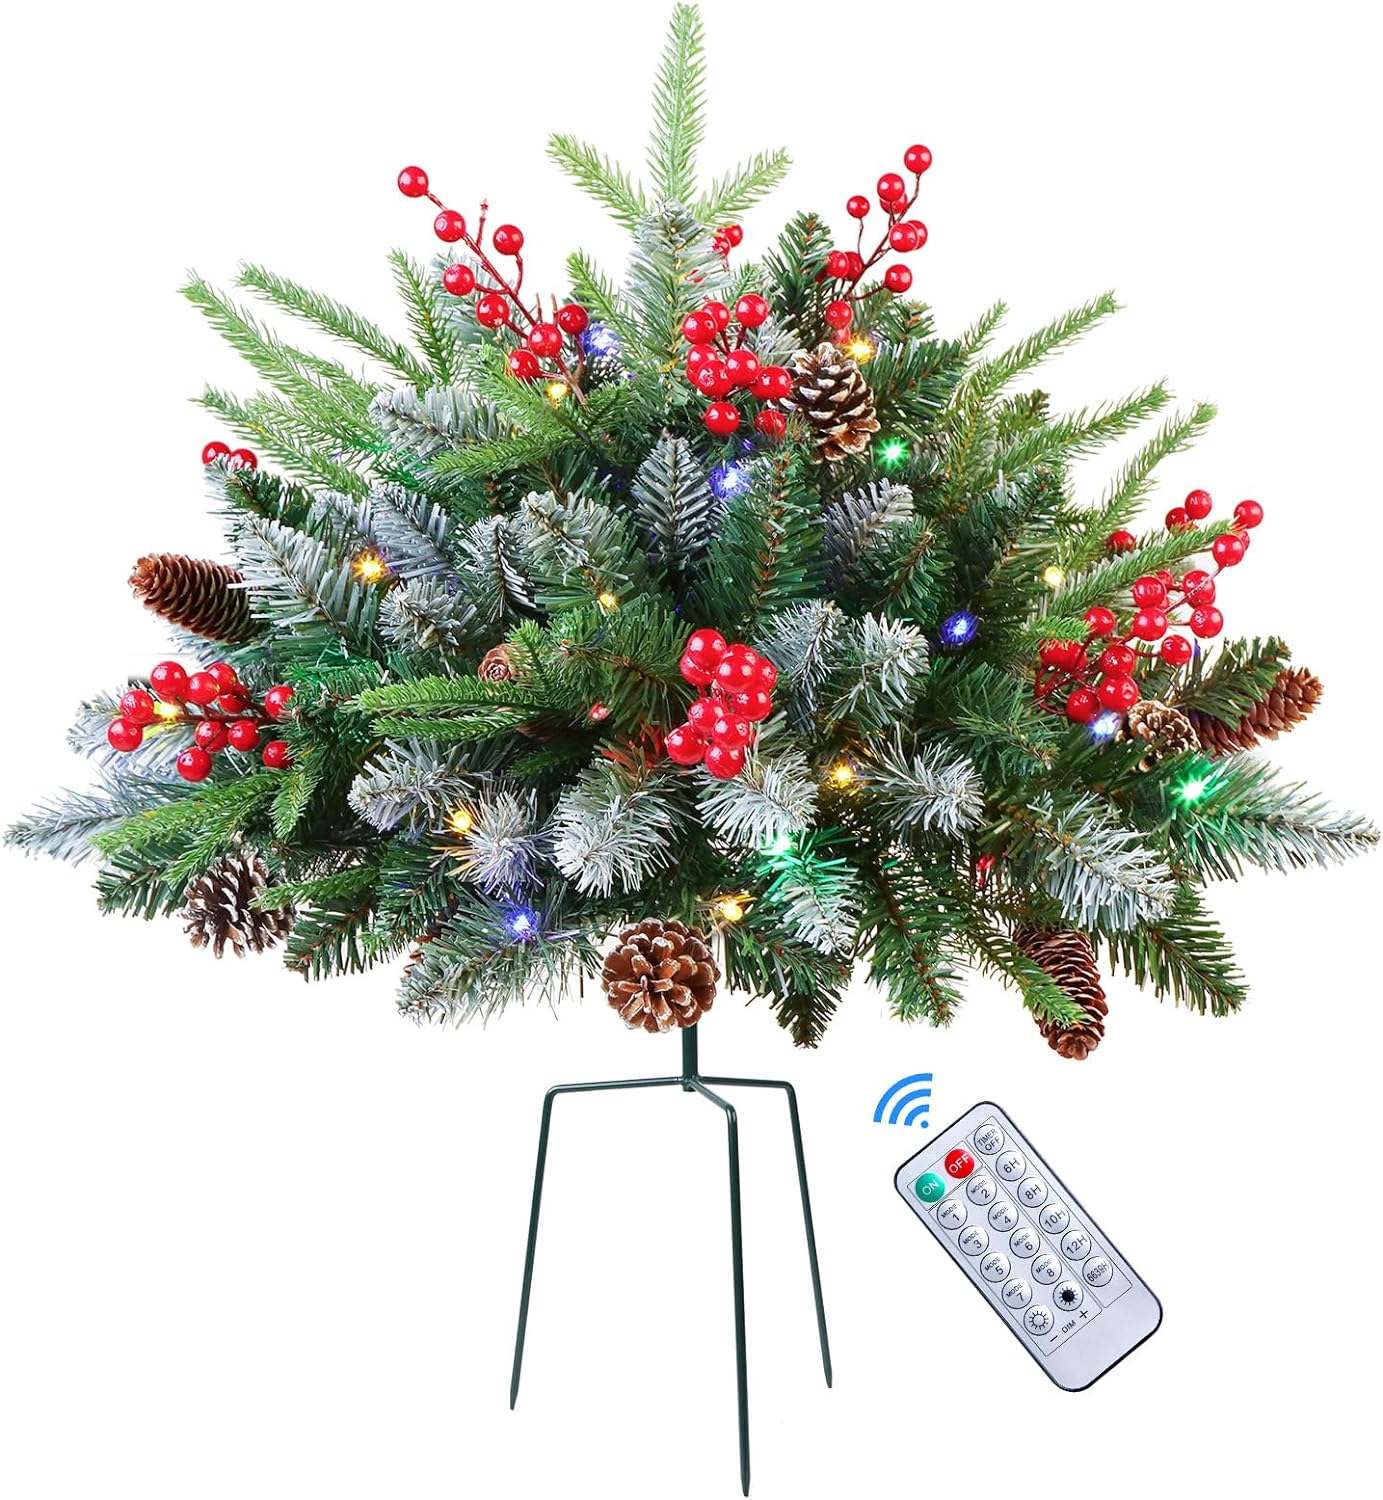 Set of 1 18 Inch Lighted Outdoor Christmas Tree with Remote